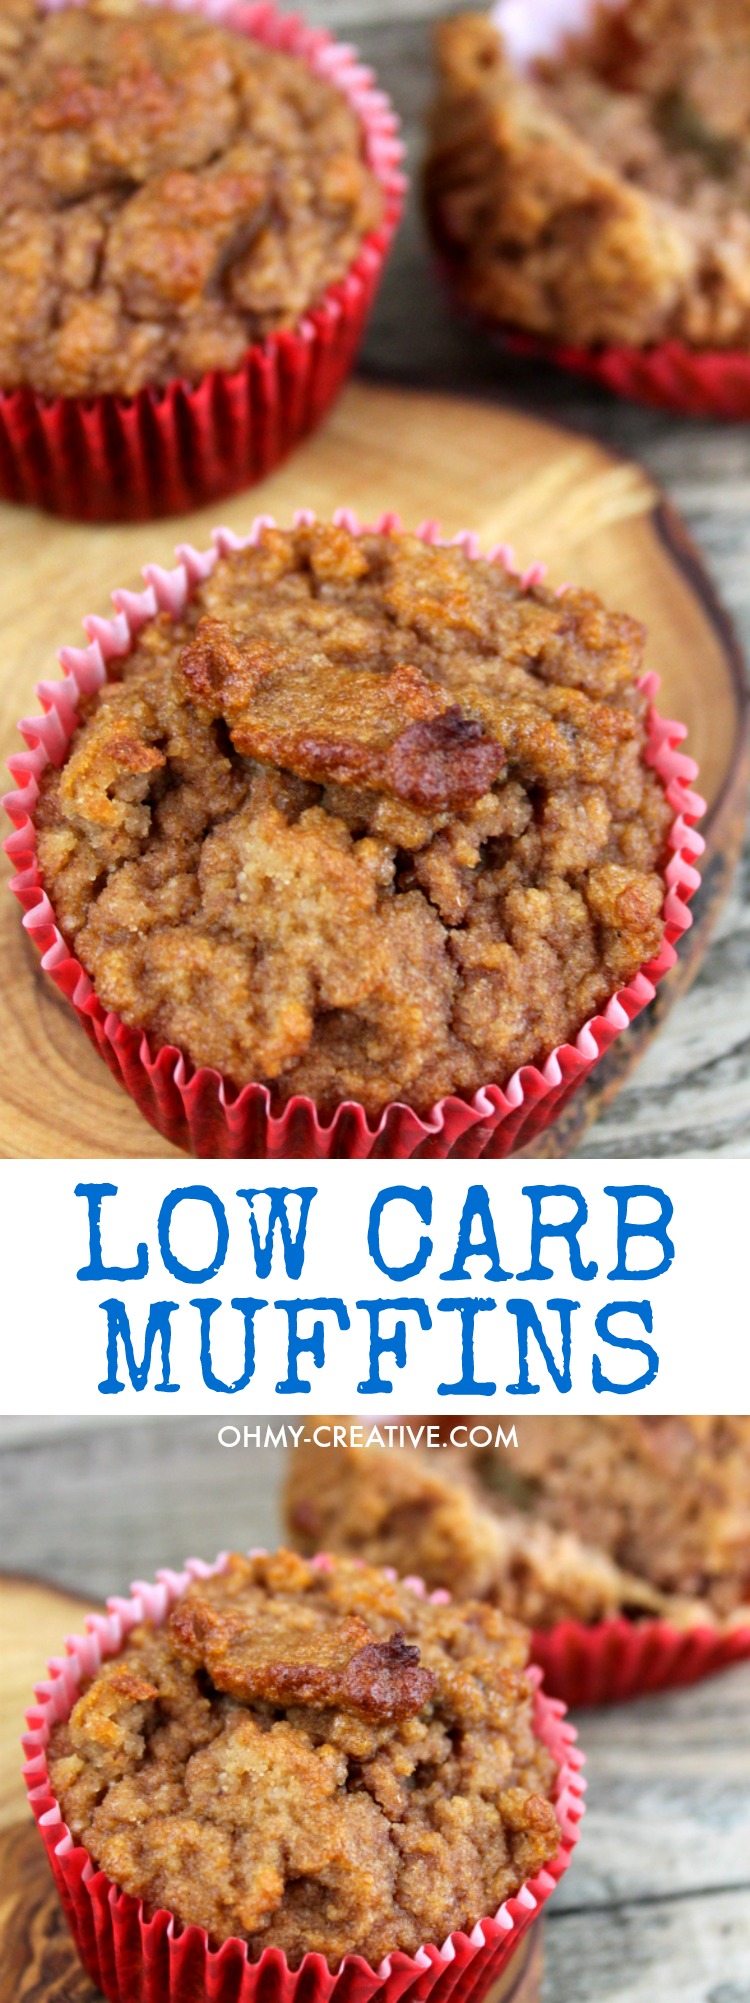 These Low Carb Muffins are delicious - a great no sugar muffin recipe using almond flour. A moist, flavorful gluten free muffin recipe for those following a gluten free diet. Popular Pins by OHMY-CREATIVE.COM